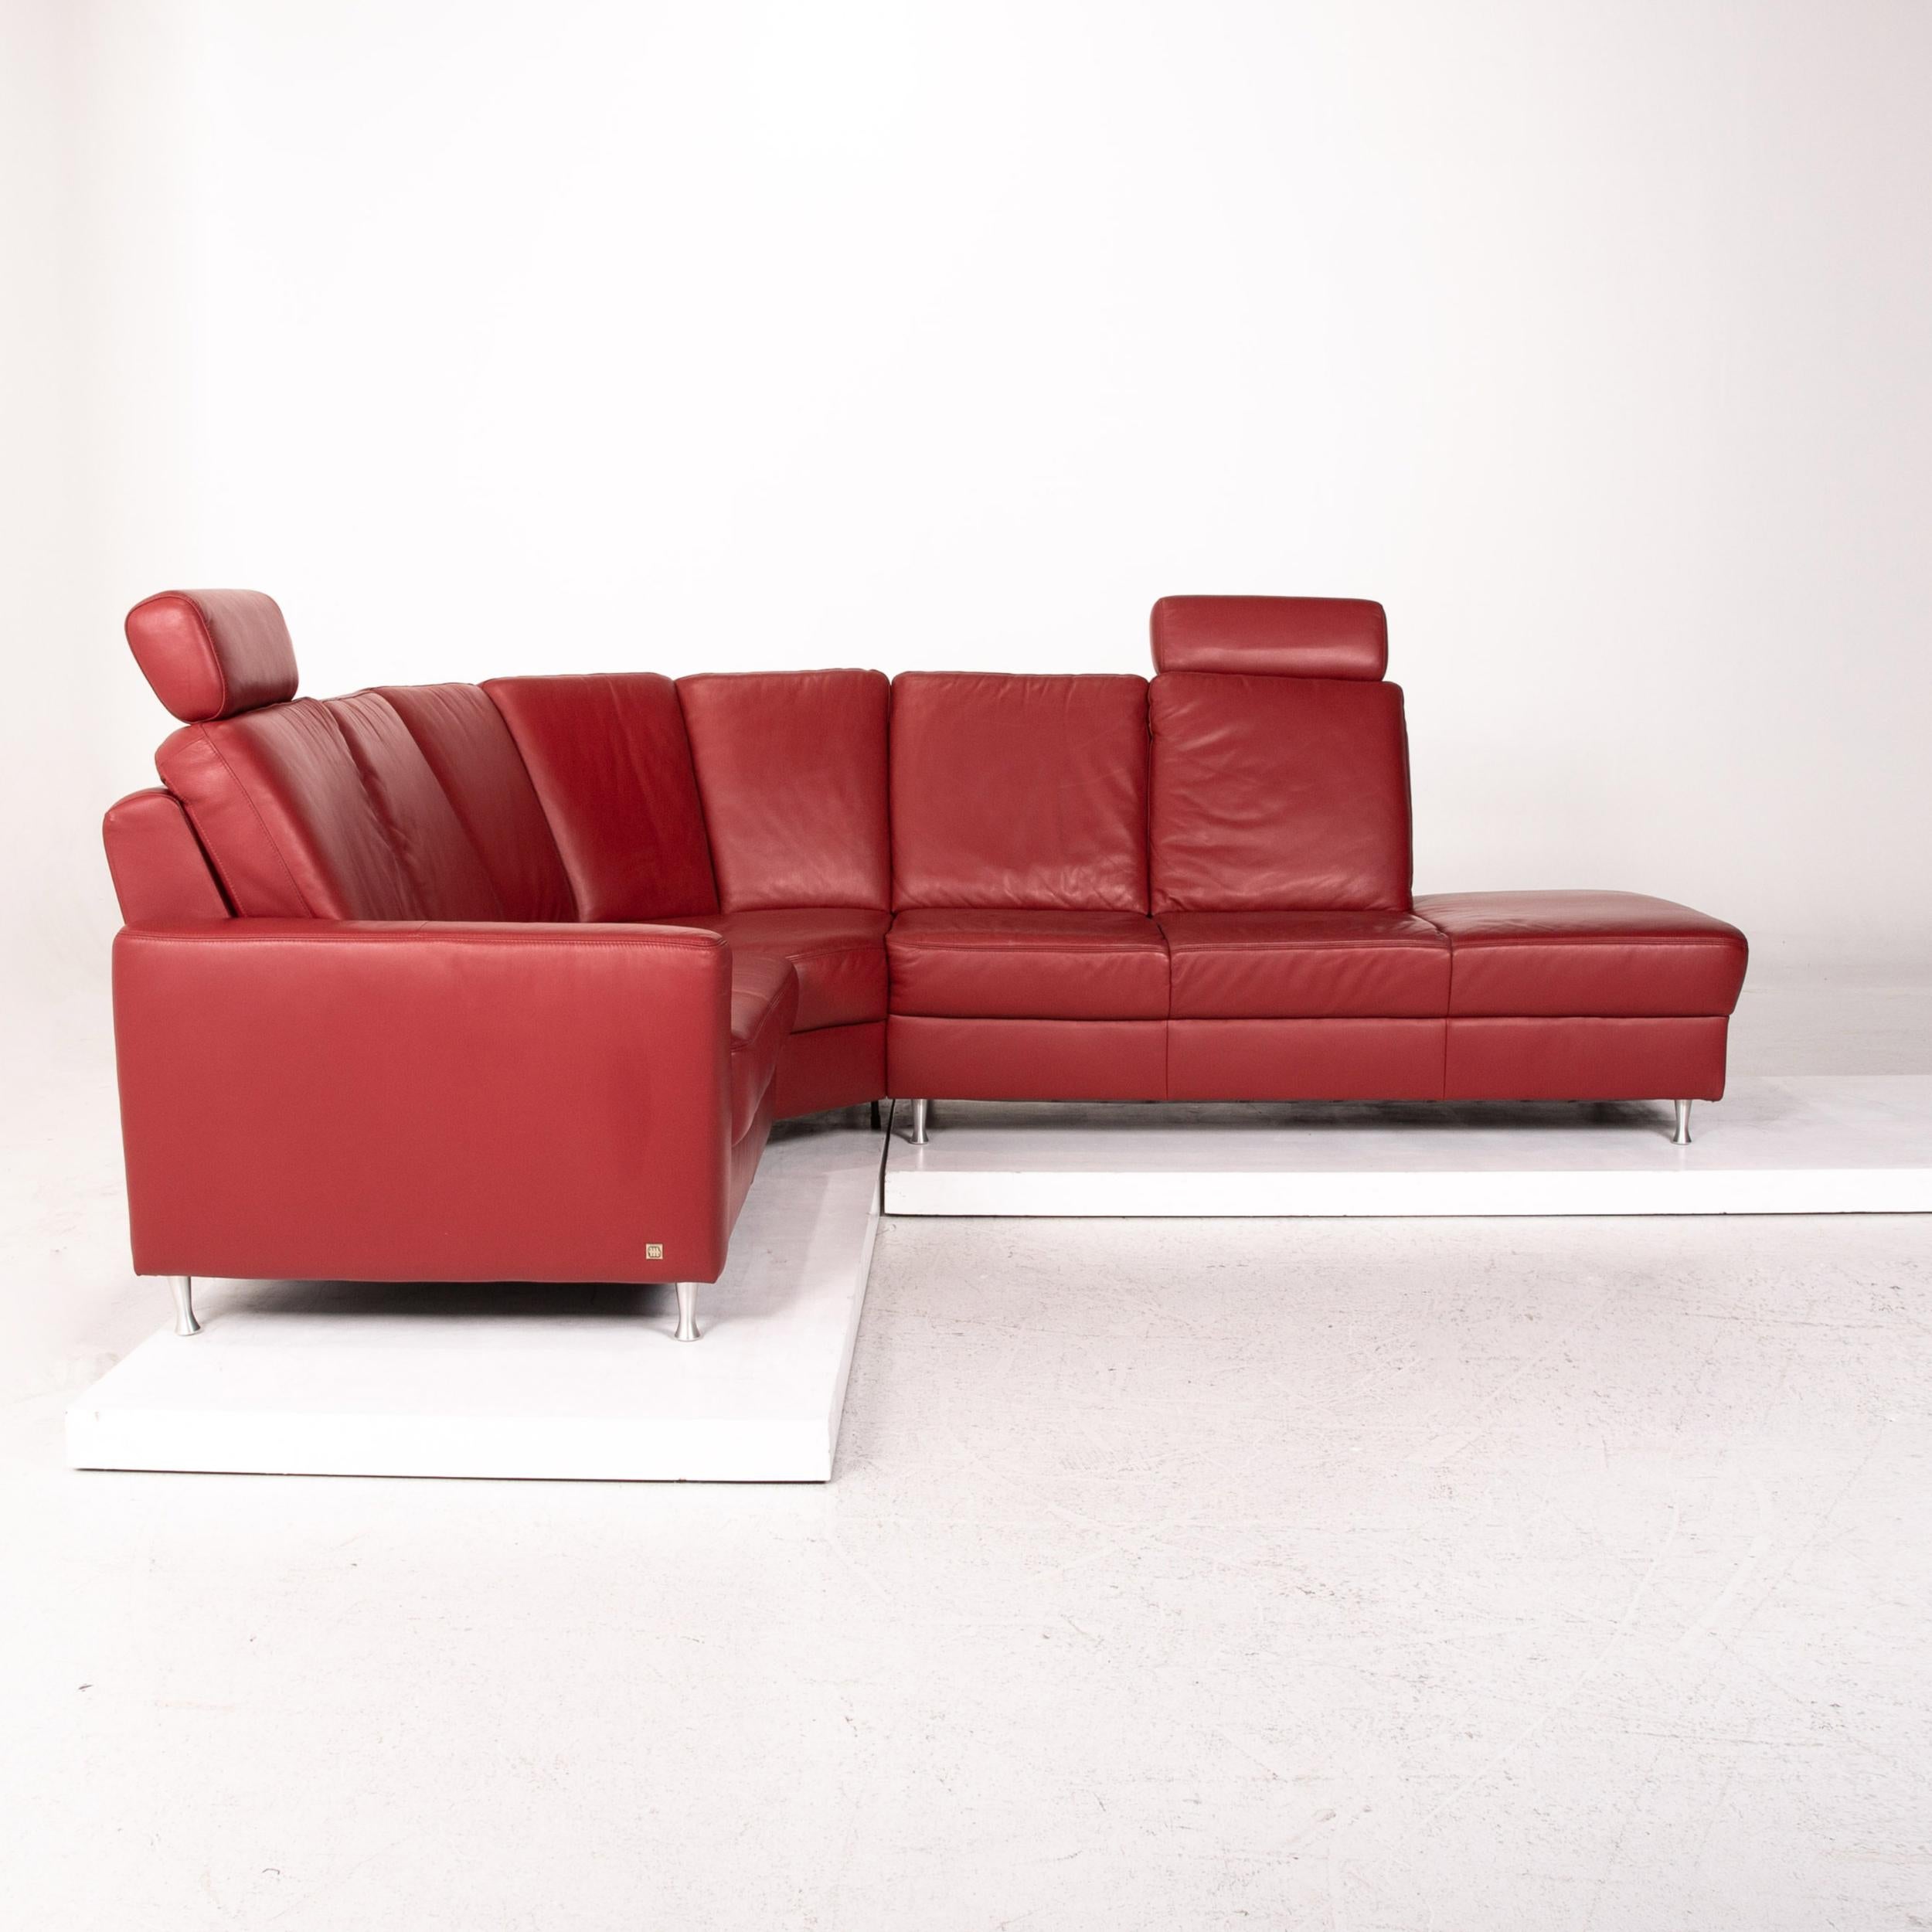 Sample Ring Leather Corner Sofa Red Dark Red Sofa Function Couch For Sale 4